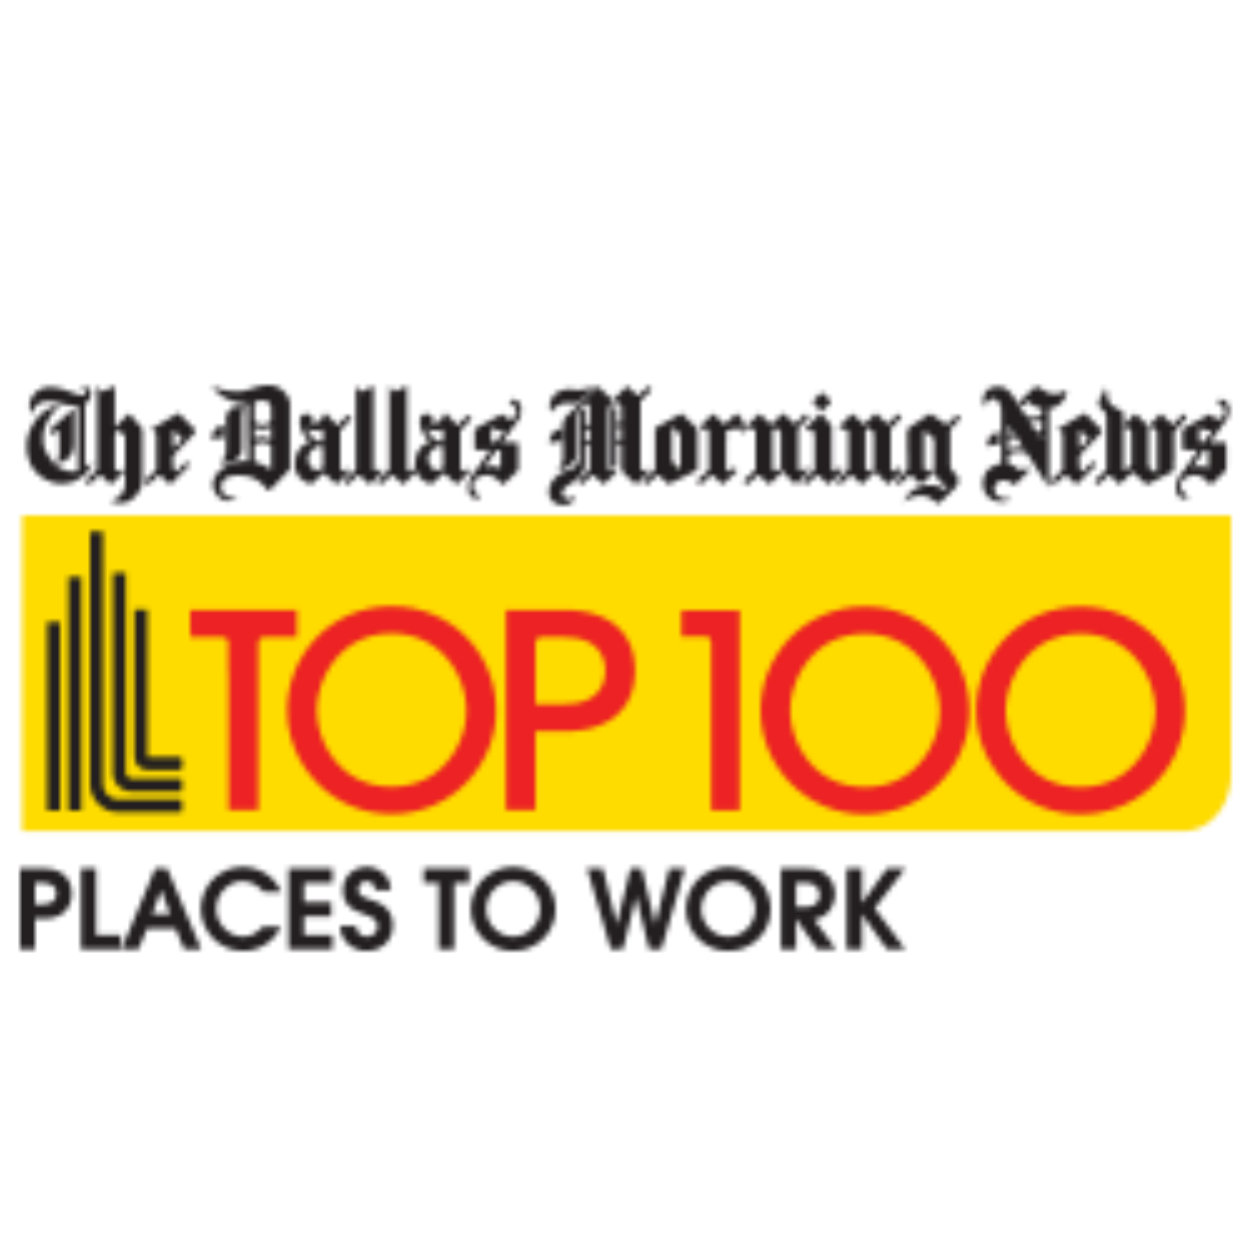 The Dallas Morning News Recognizes Credera as a 4-Time Winner of The Top 100 Places to Work